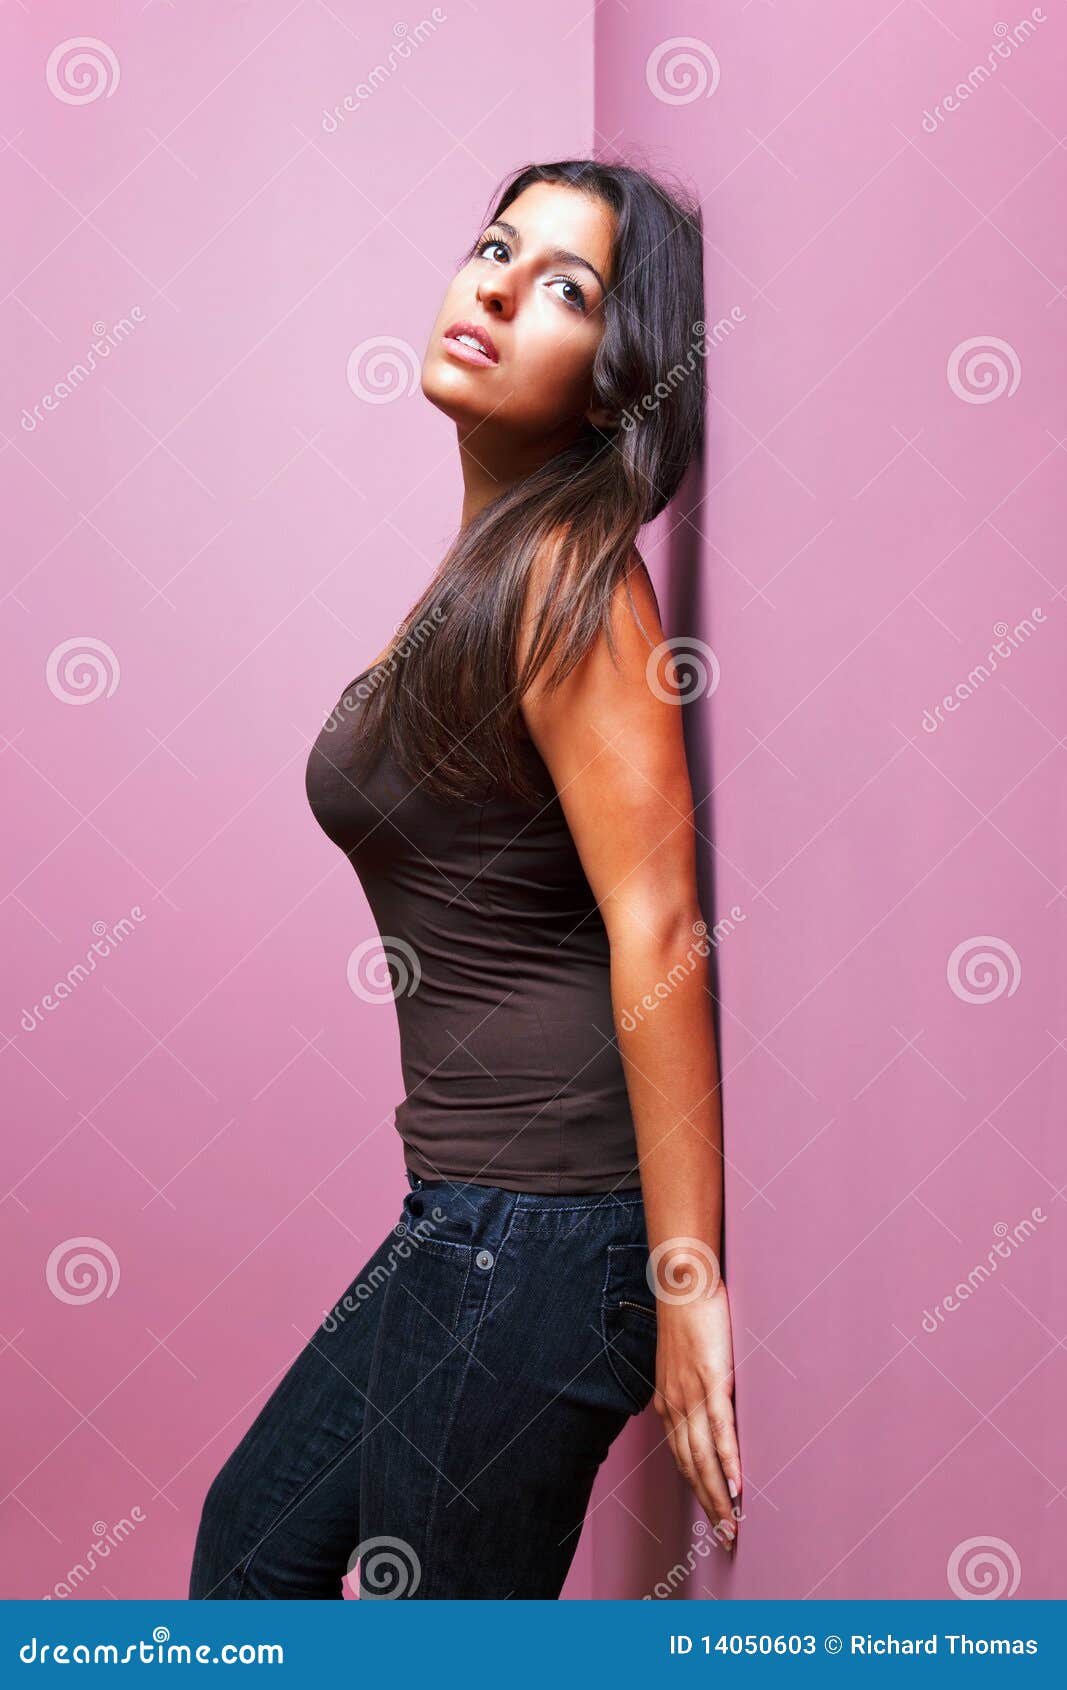 Woman Leaning Against A Wall Stock Image Image Of Love Girl 14050603